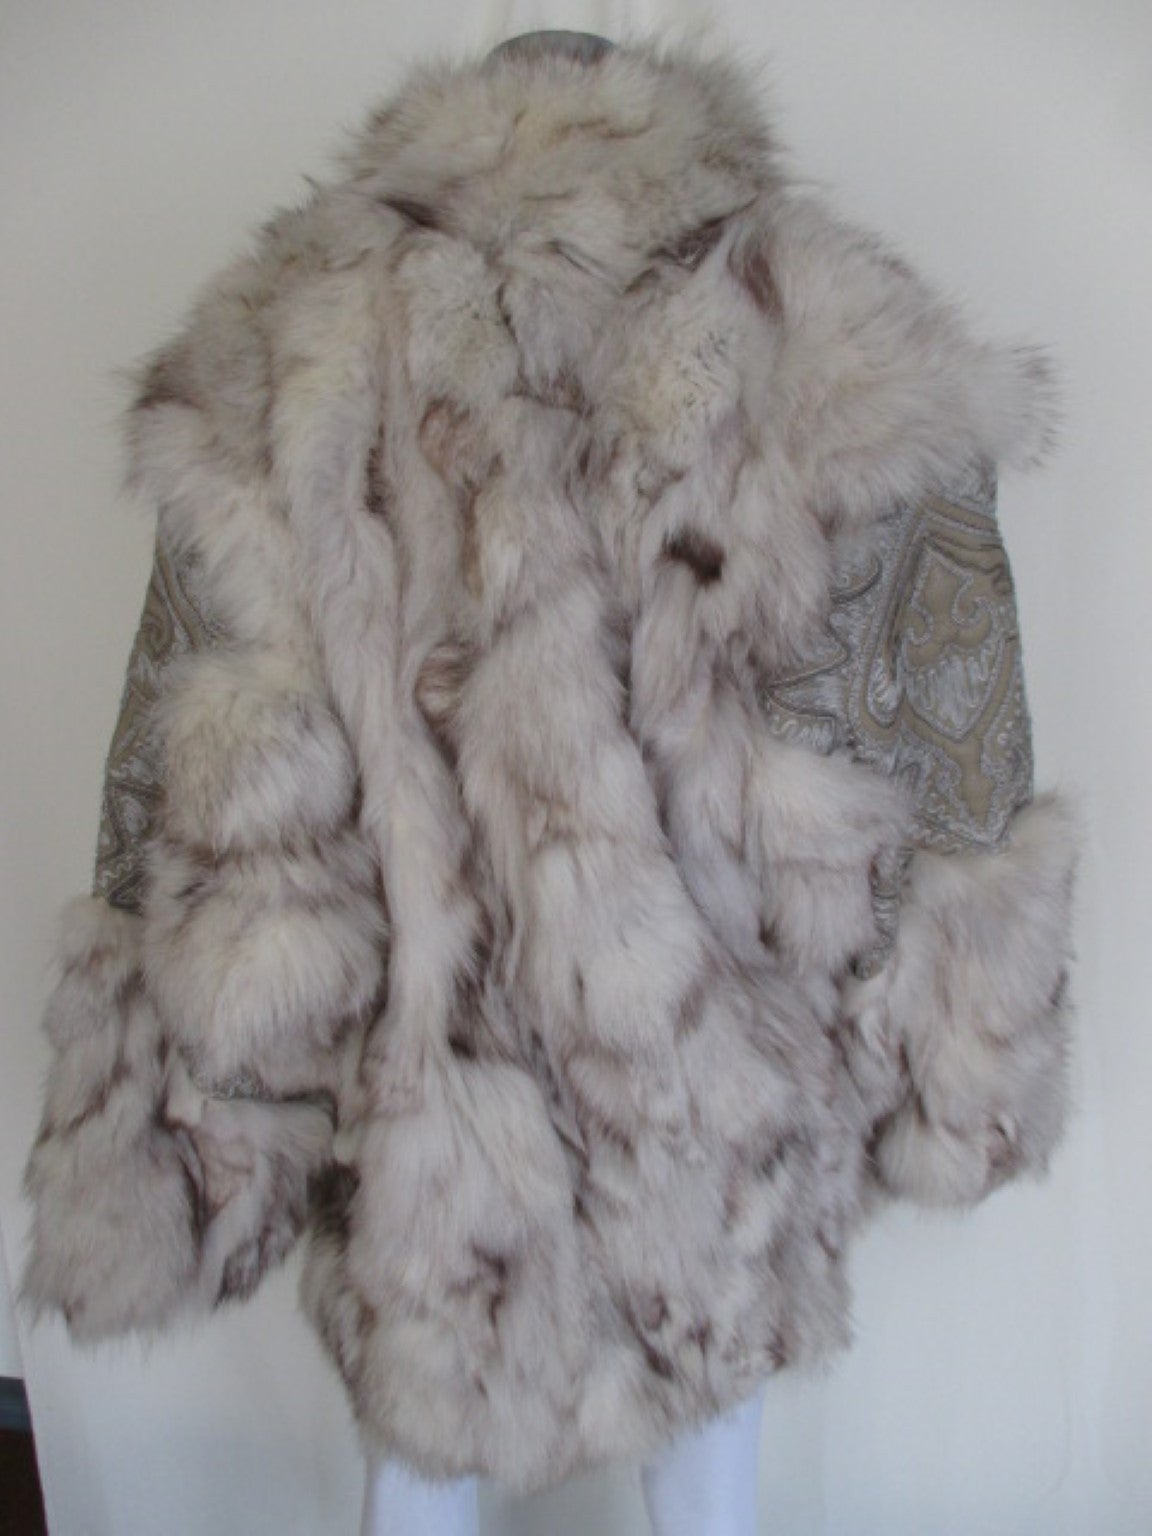 Fox vintage fur coat with 2 pockets, embroidered leather panels on the sleeves and fastens with 1 button and 2 hooks at the front.
Made in Italy from Arianna in Firenze
Size is medium/large